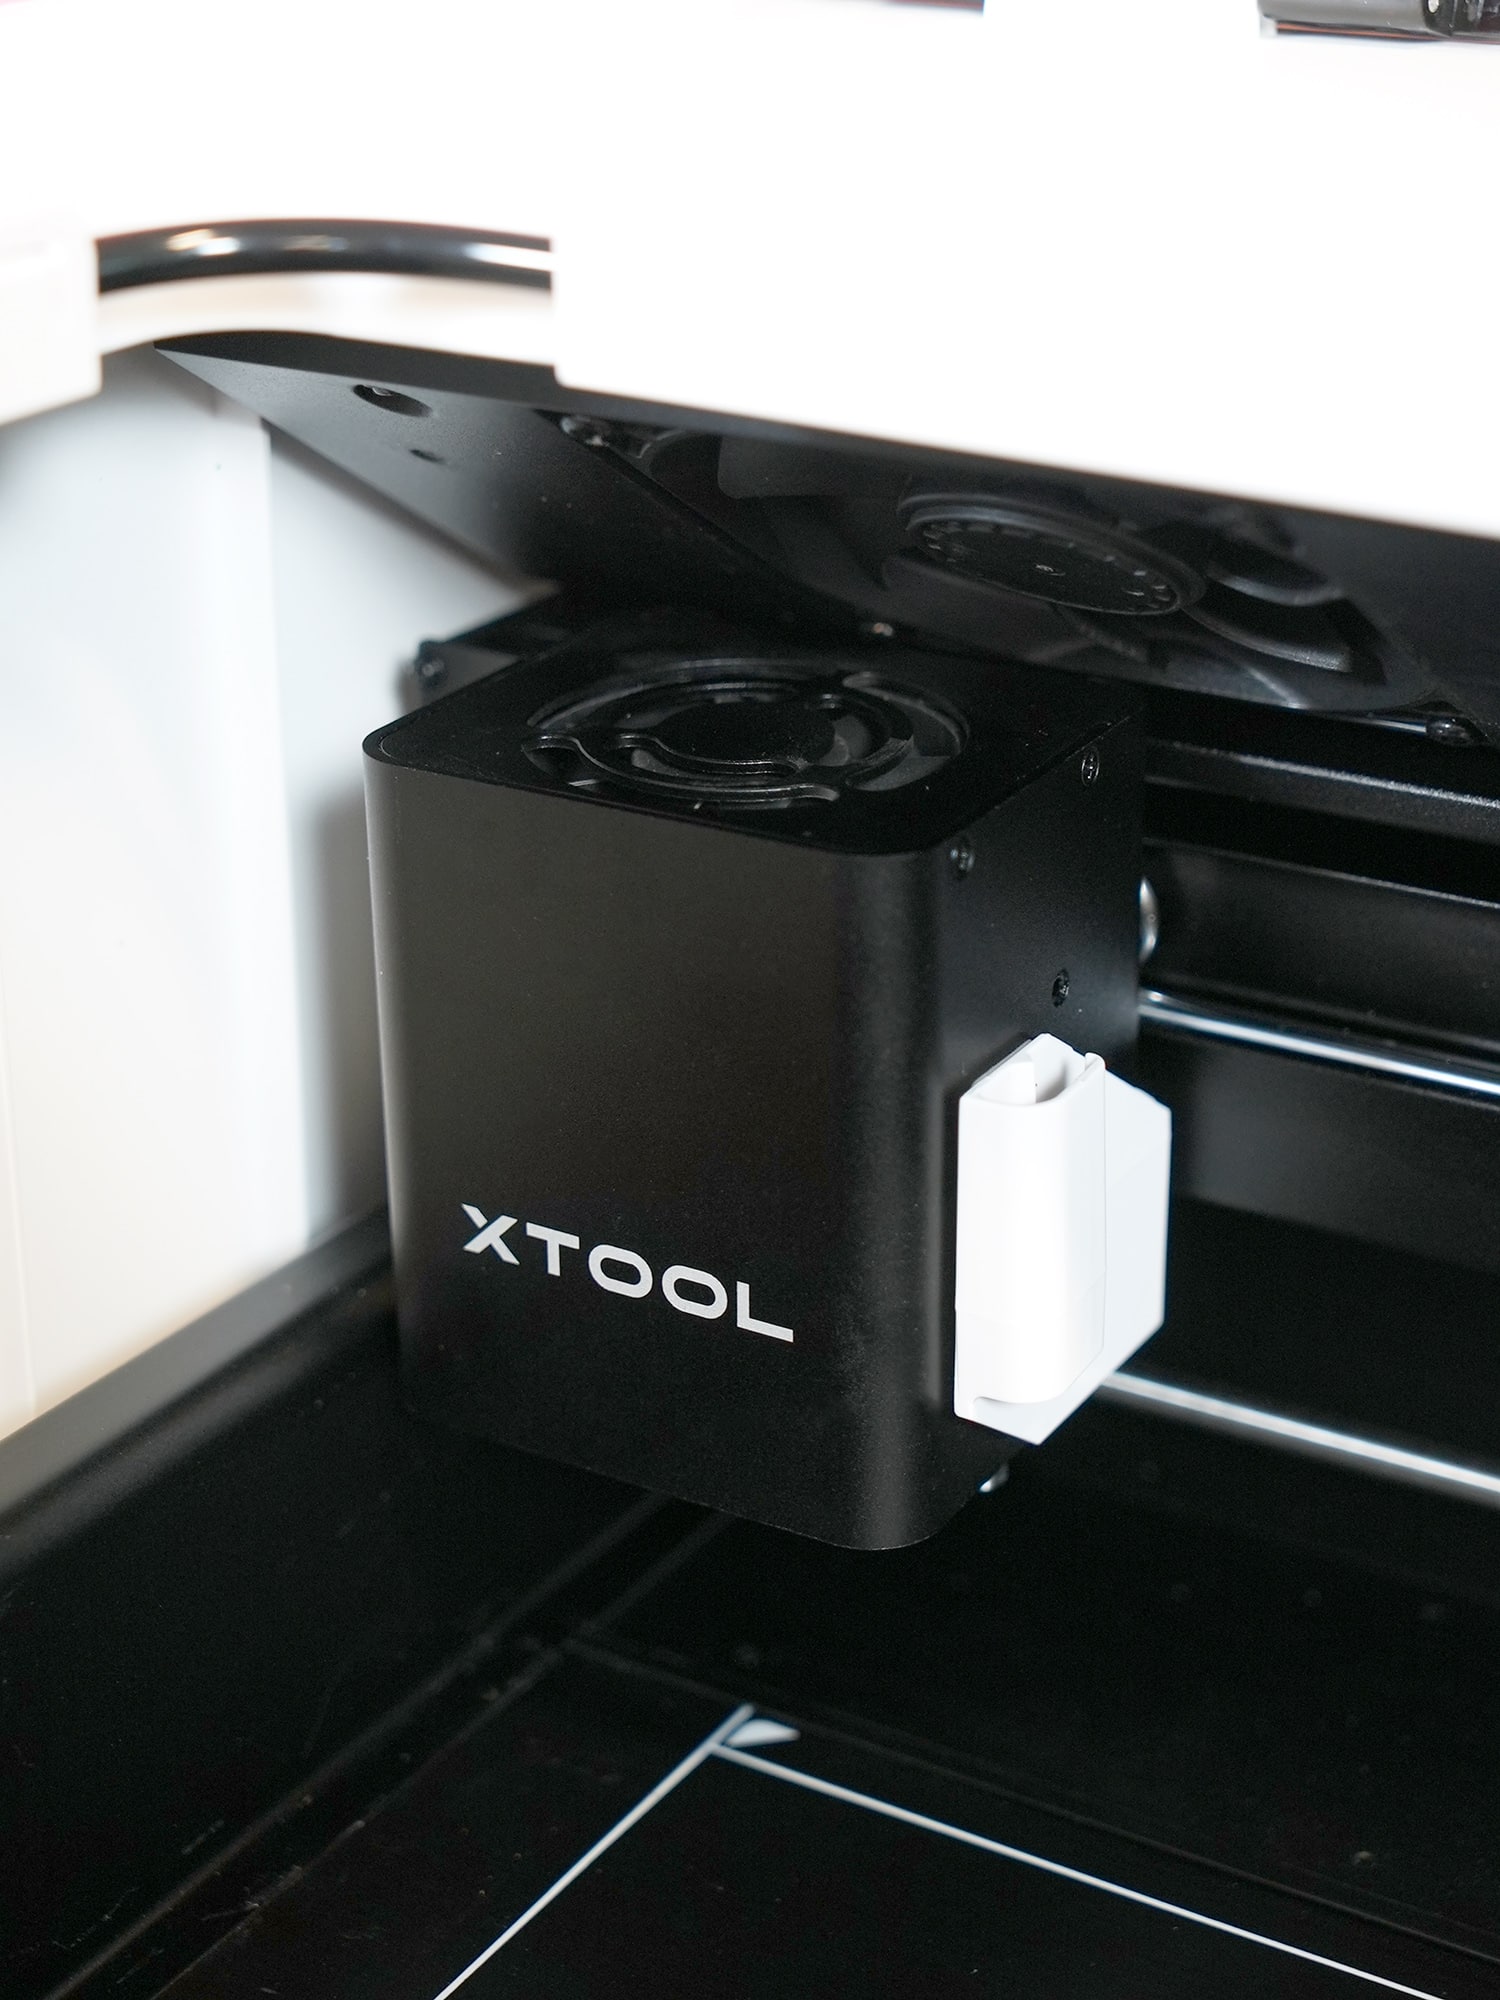 xTool M1 Review: Beginner's Guide to Laser Cutting - The Handyman's Daughter